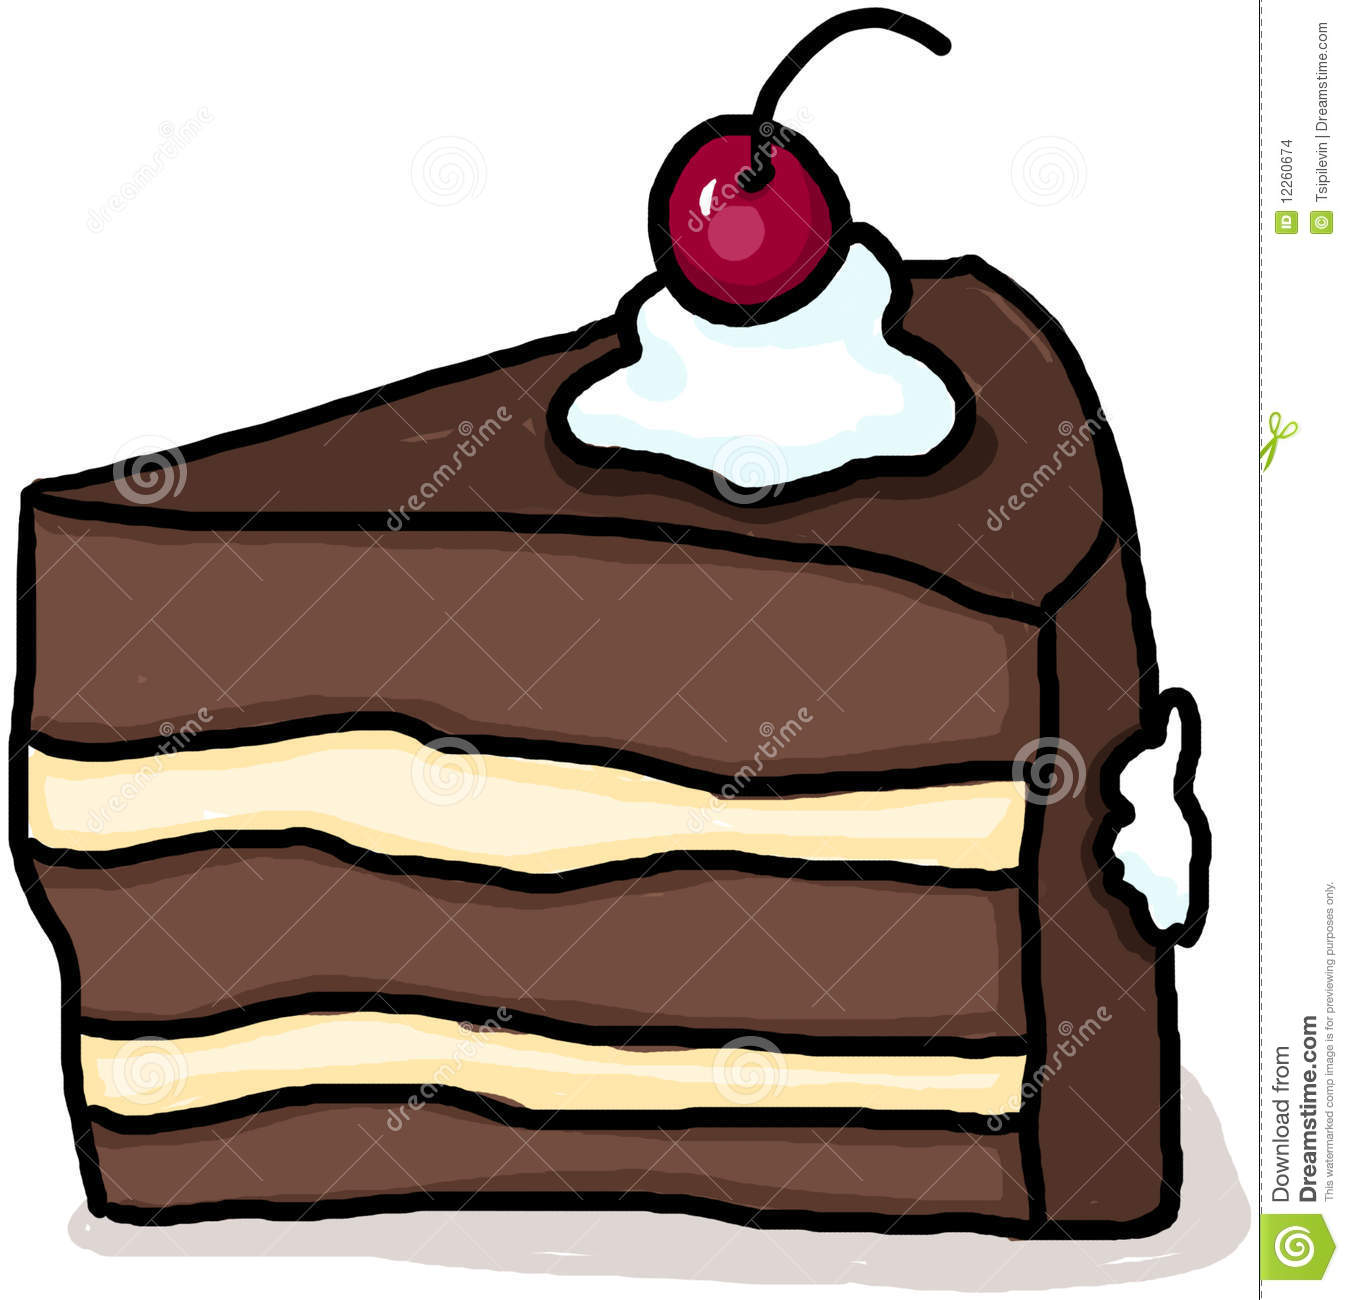     Cake Drawing  Isolated Slice Of Cake With A Cherry On Top  Cartoon